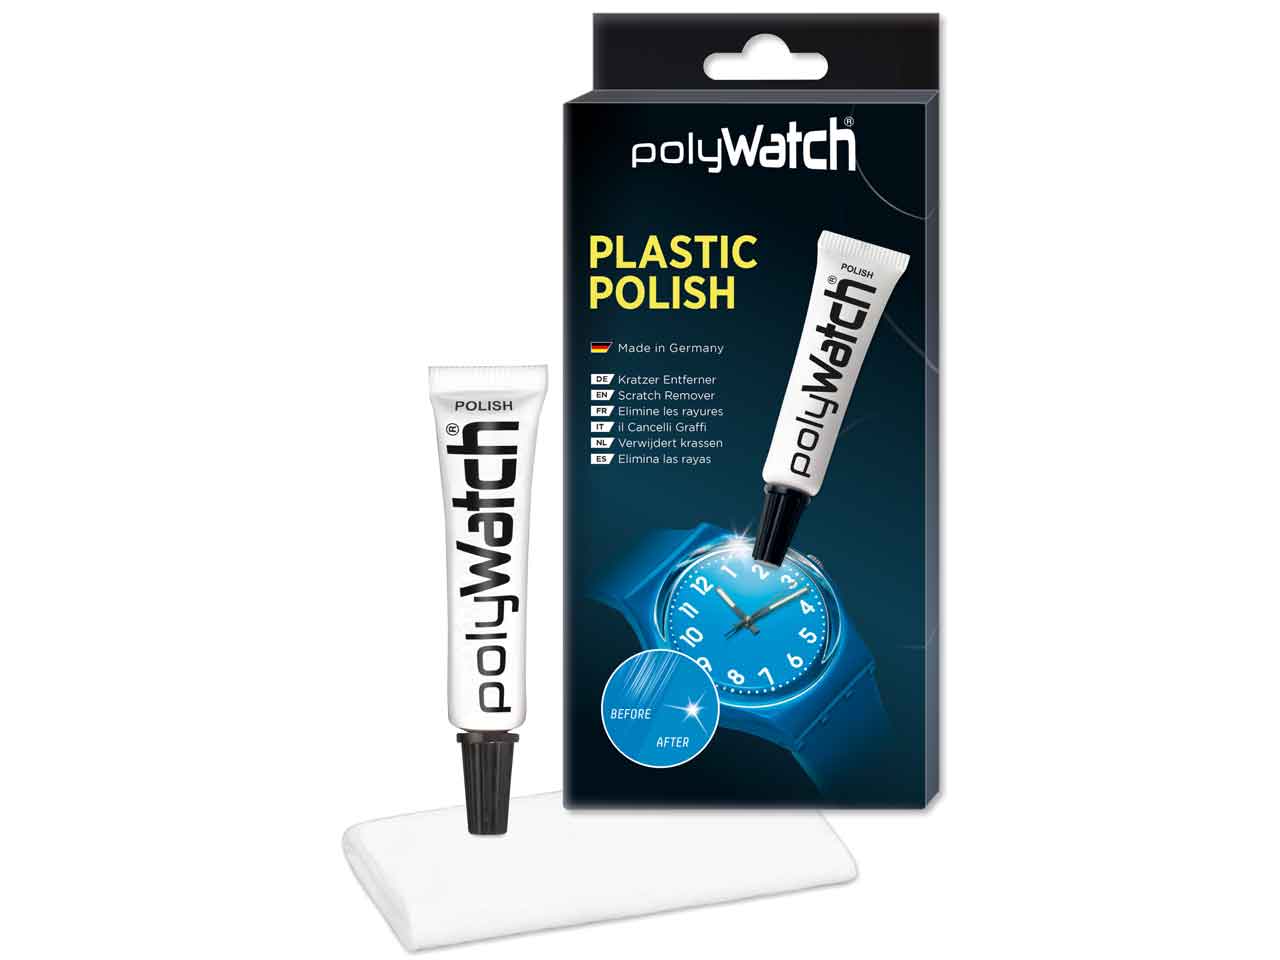 Will the polywatch products work with an Apple Watch face? Thank you